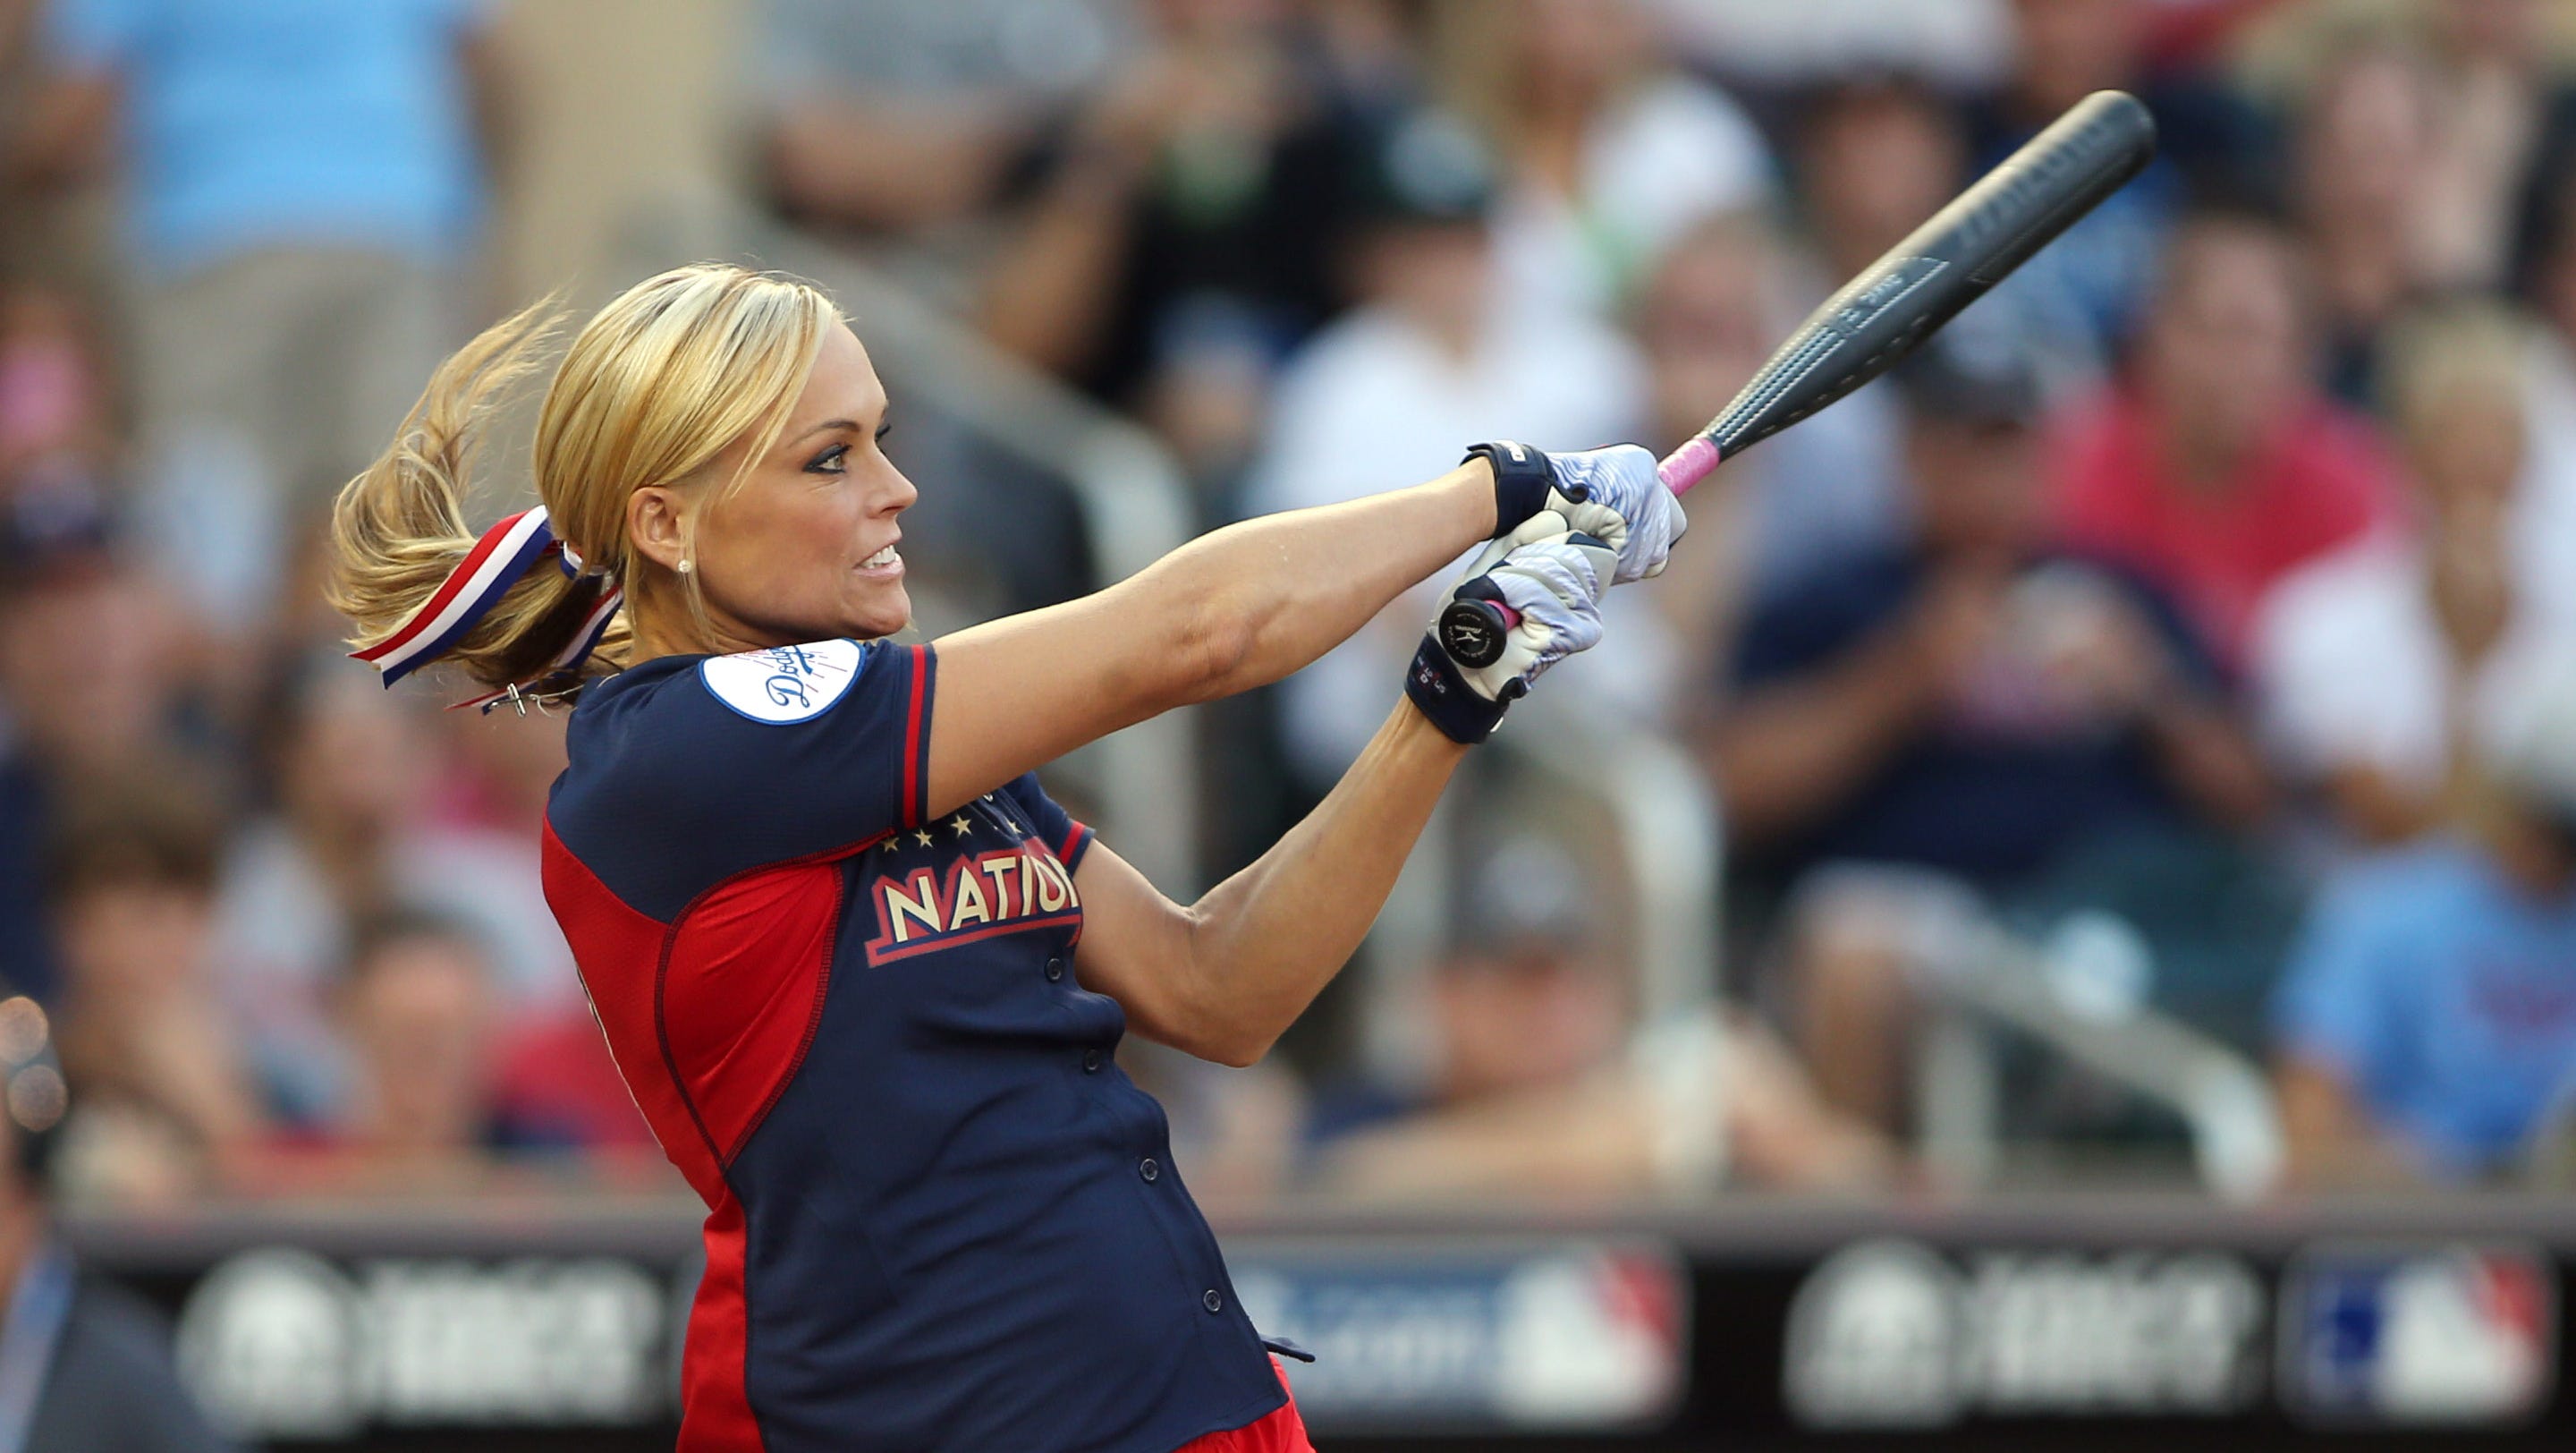 U.S. softball legend Jennie Finch on the game's future in the Olympics